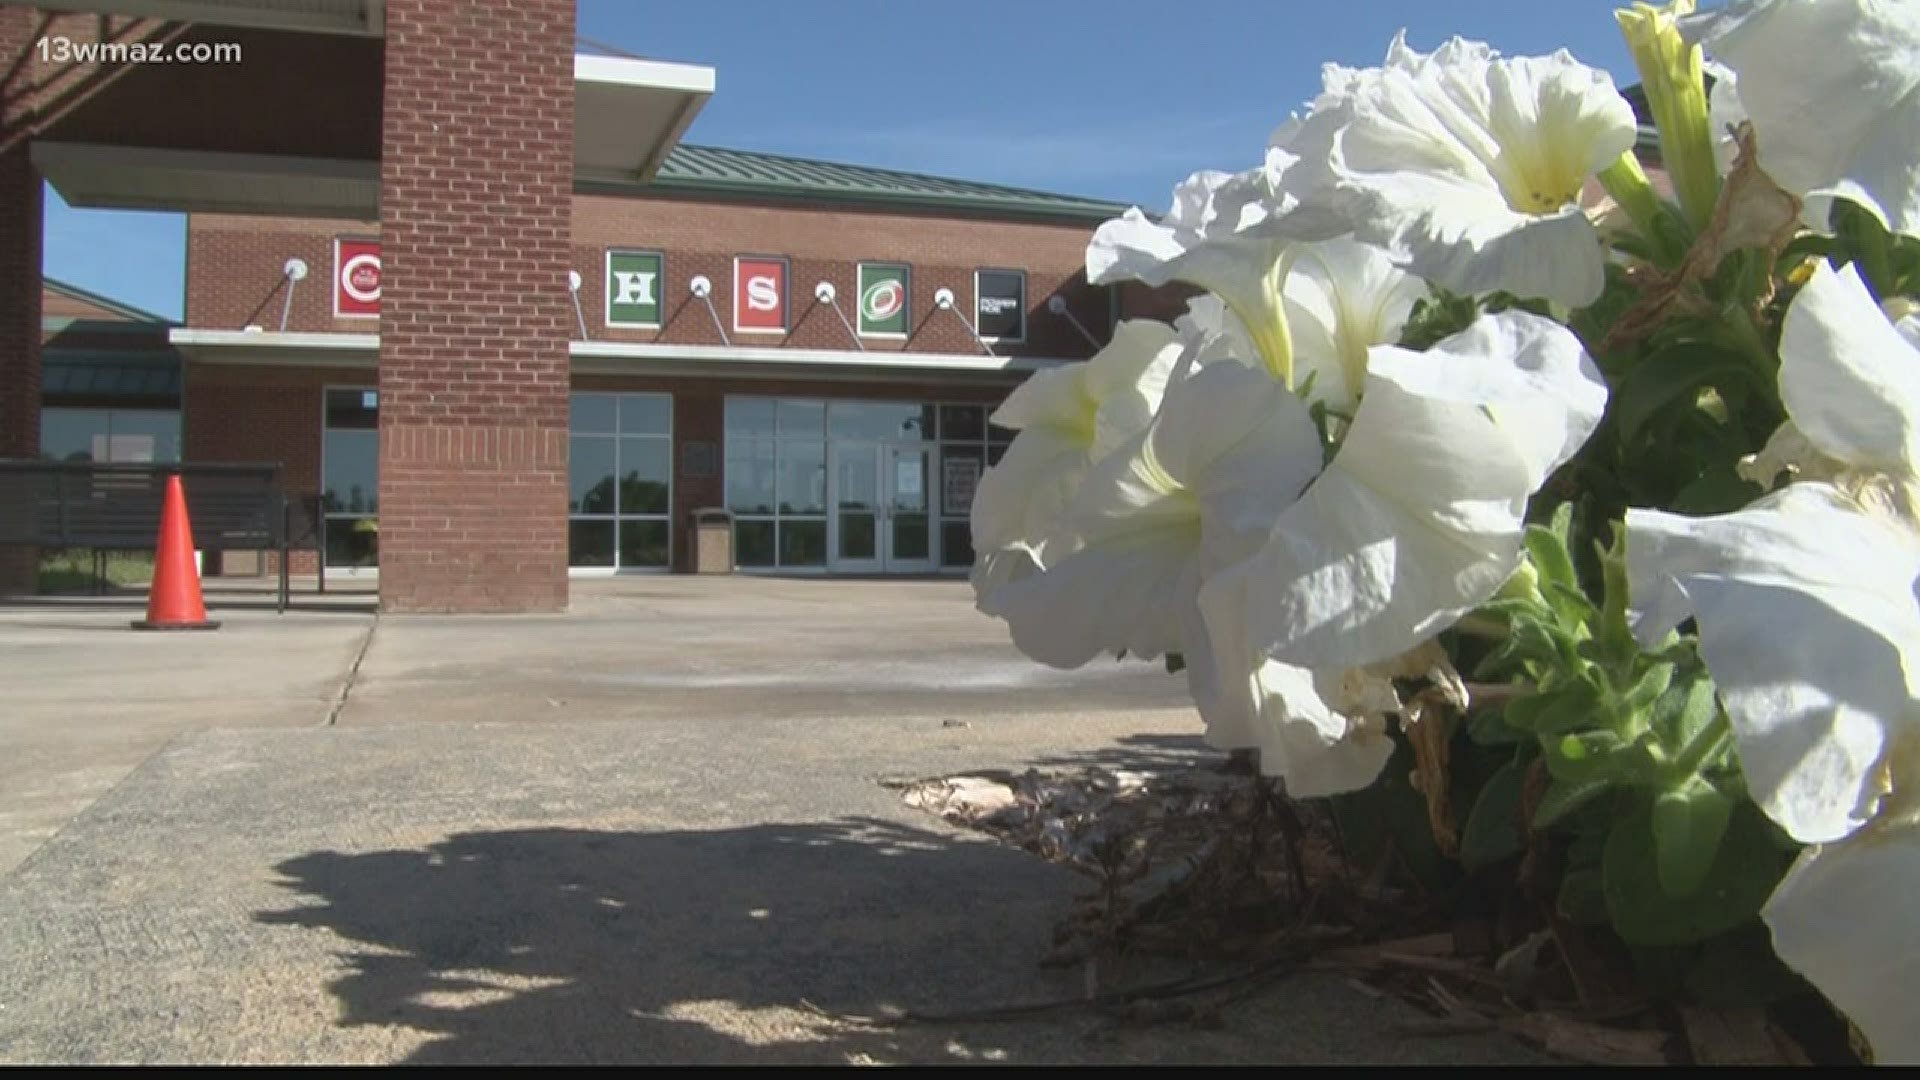 After Bibb County Schools' announcement, 2 Rutland High School seniors say they are coming to terms with their senior year officially ending.